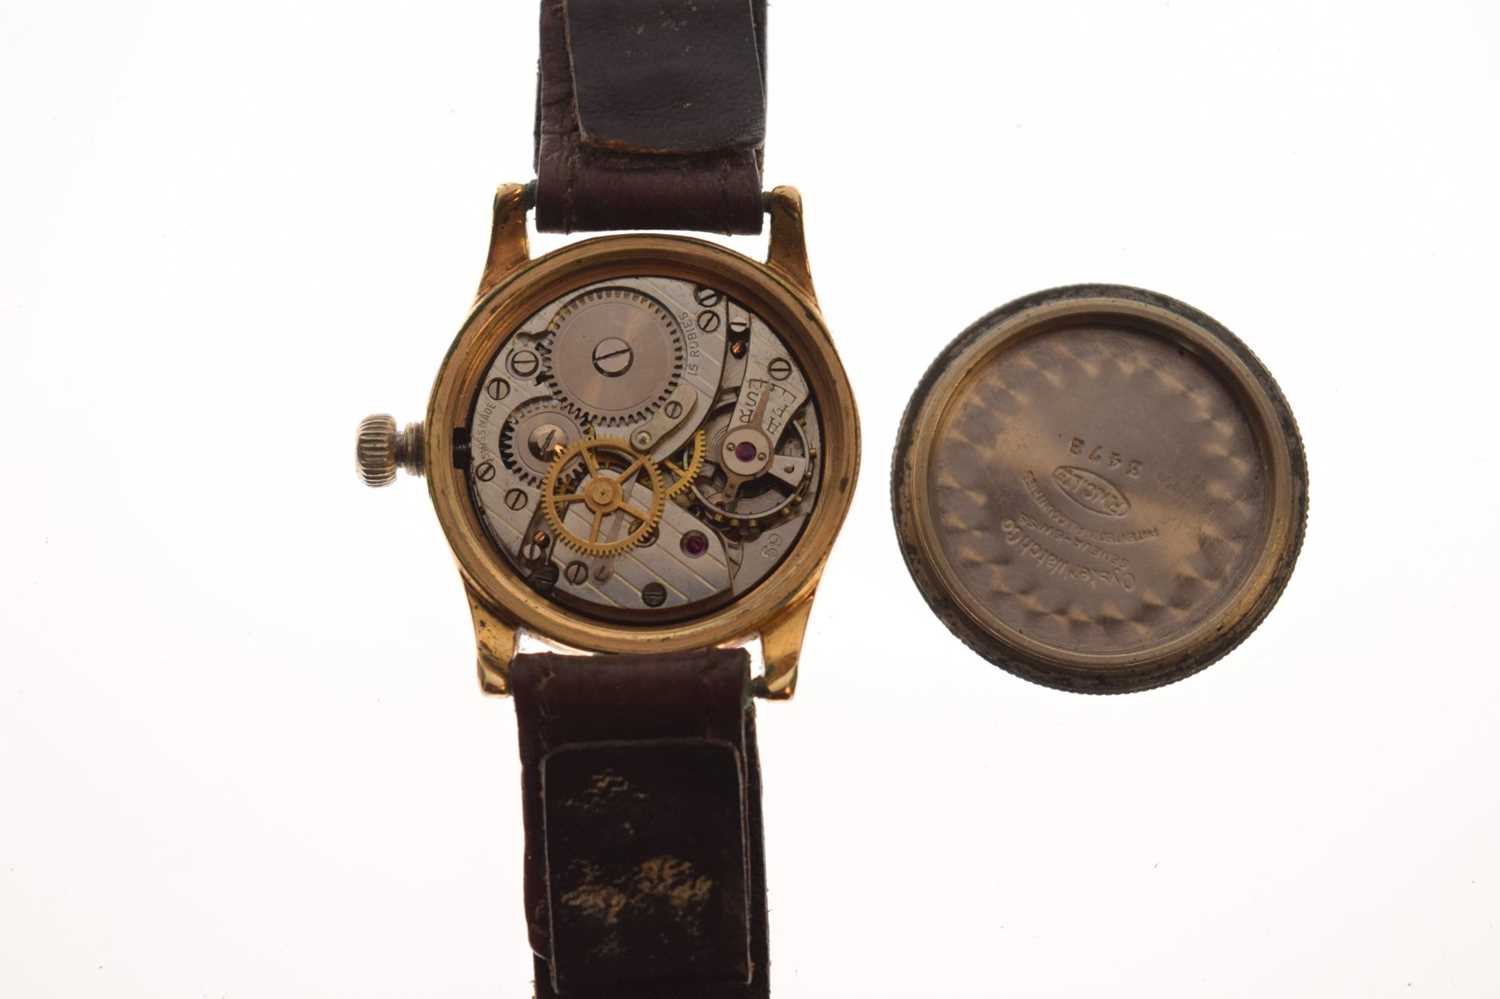 Rolex - 1940s Oyster Recorda manual wind wristwatch - Image 8 of 10